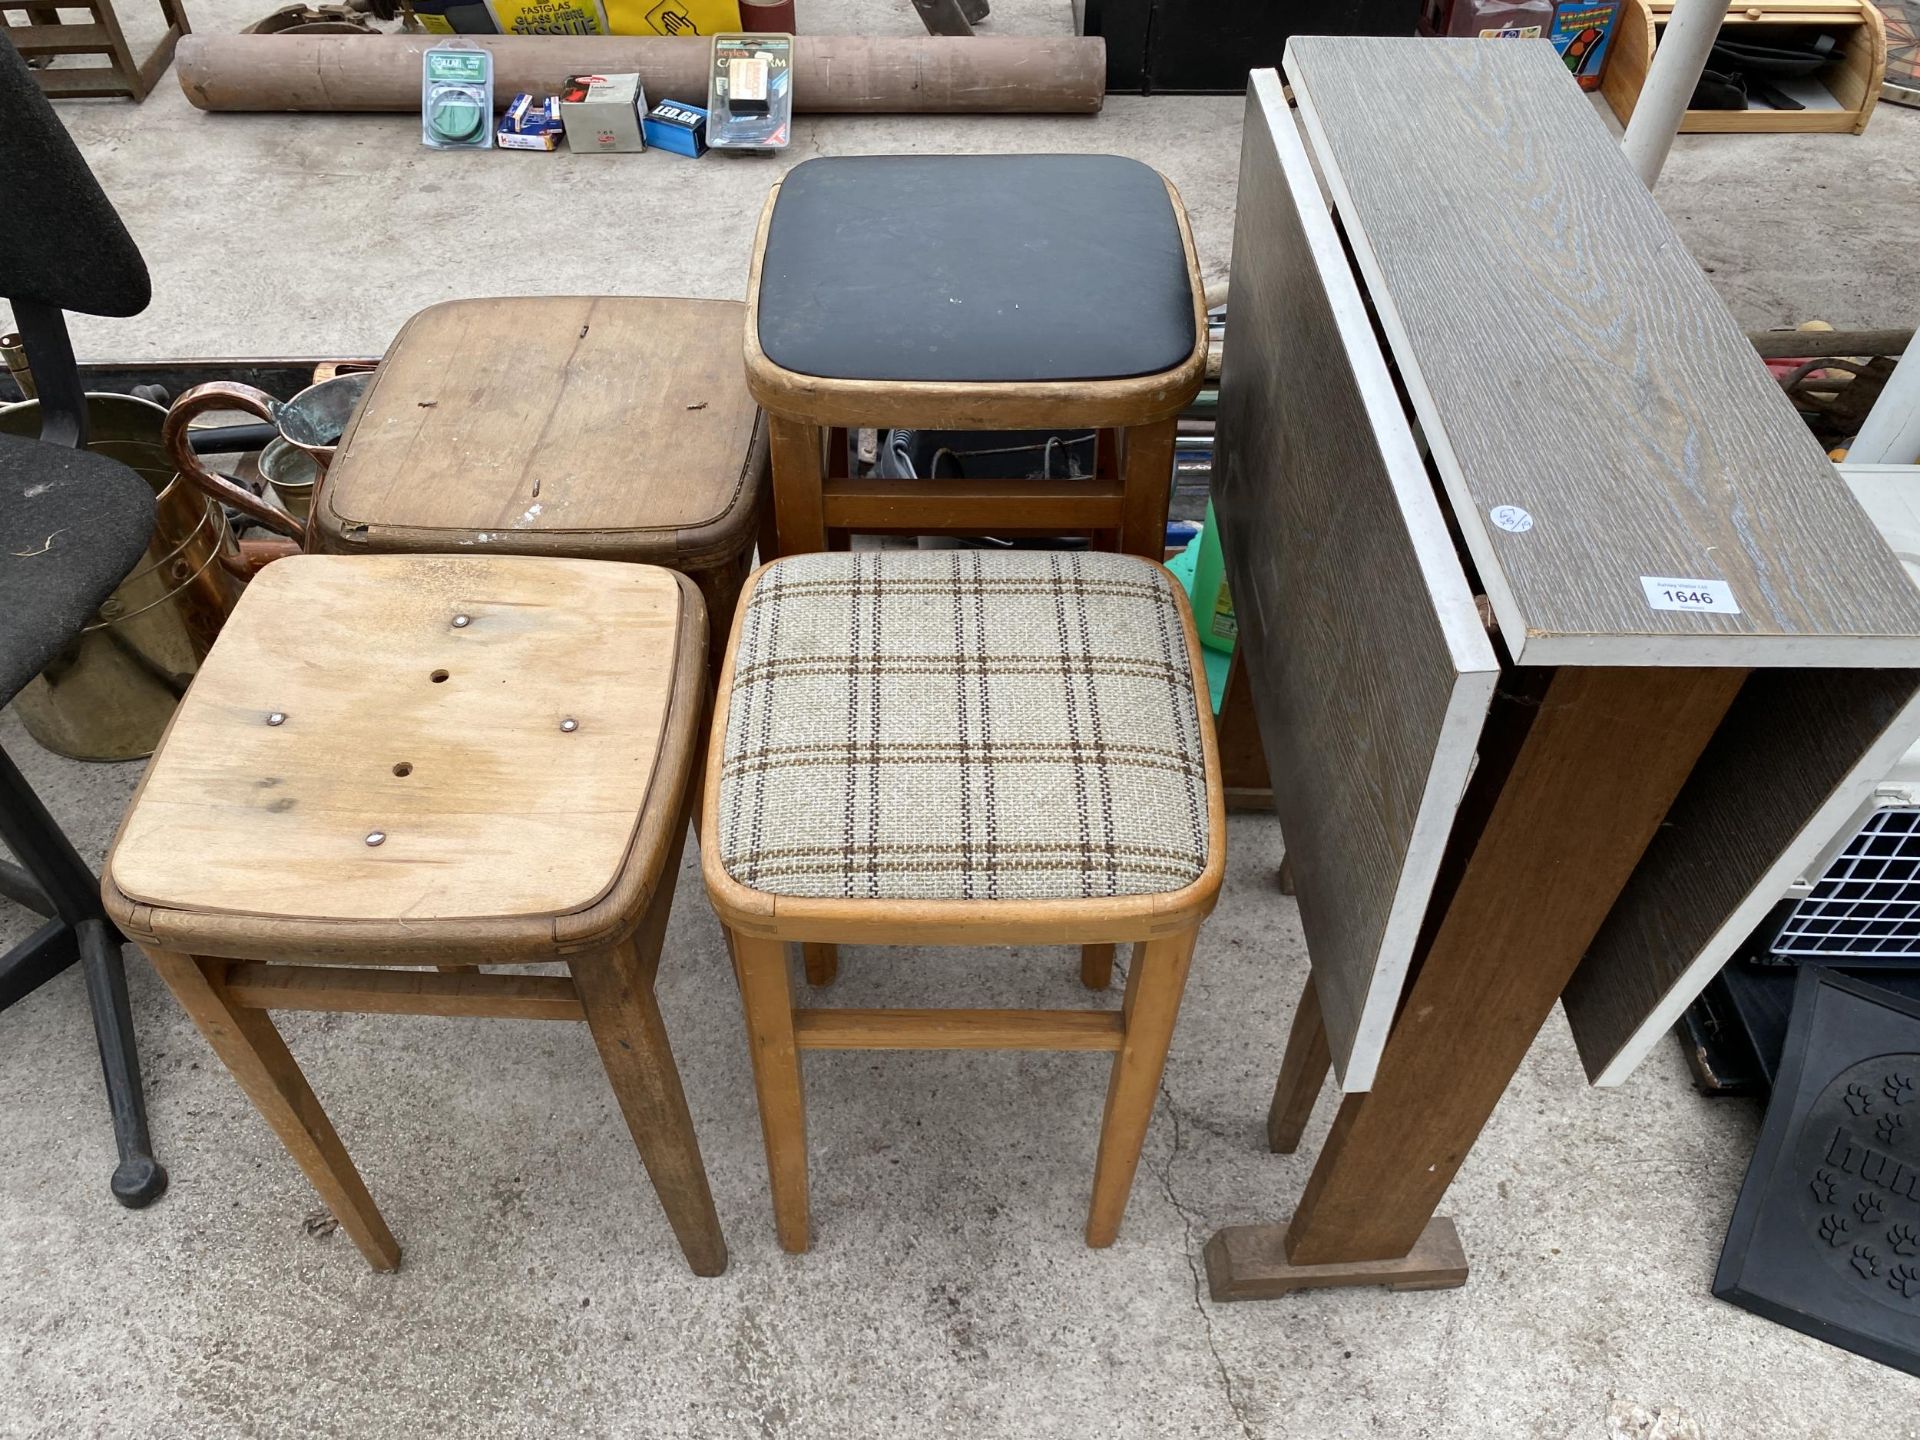 FOUR VARIOUS WOODEN STOOLS AND A FOLDING TABLE